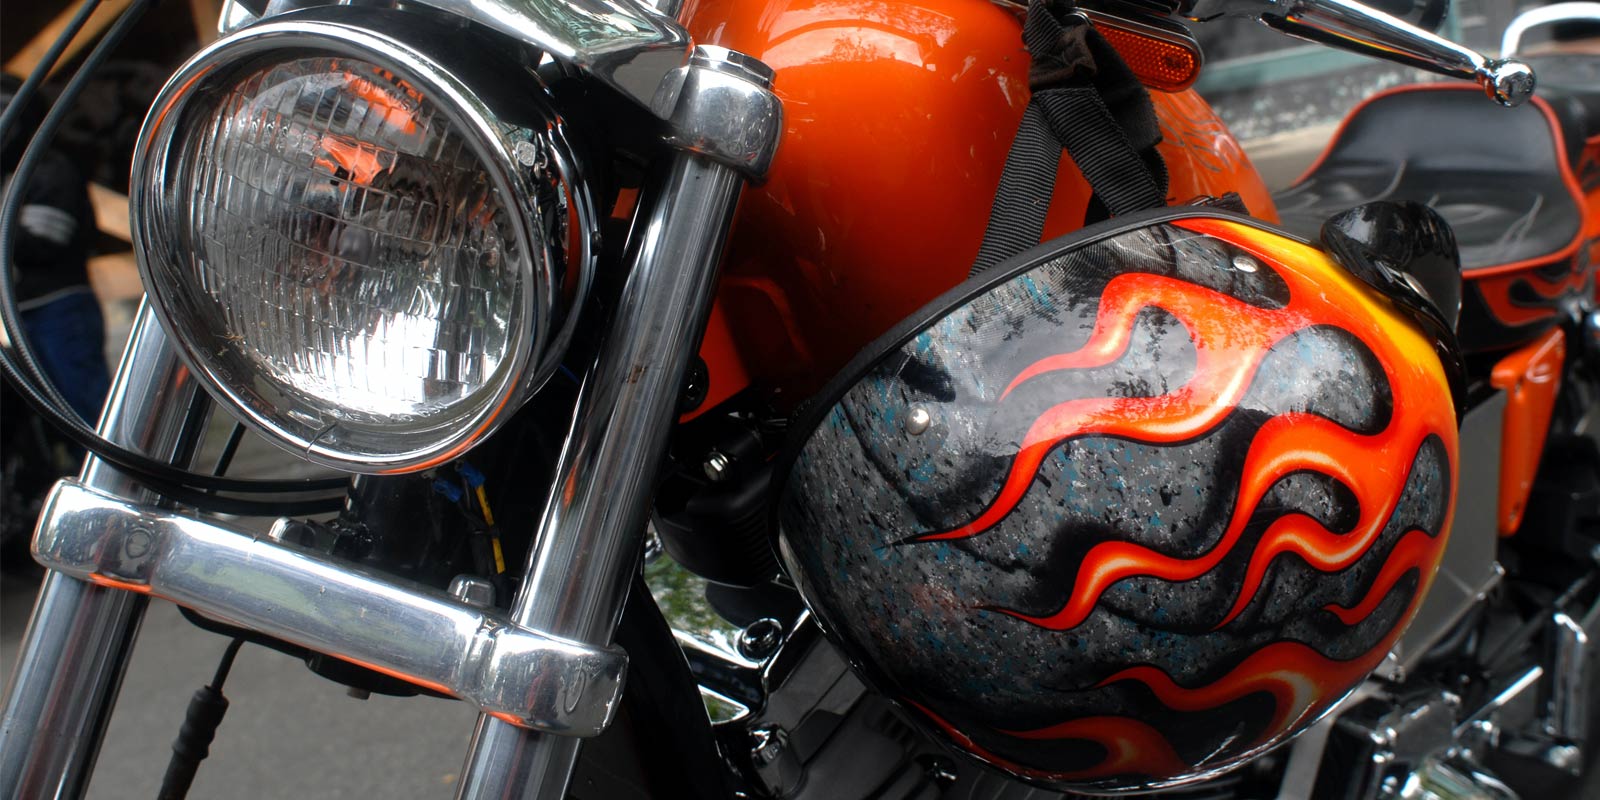 8 Of The Sickest Custom Motorcycle Paint Jobs We Ve Seen Robs Customs And Restorations